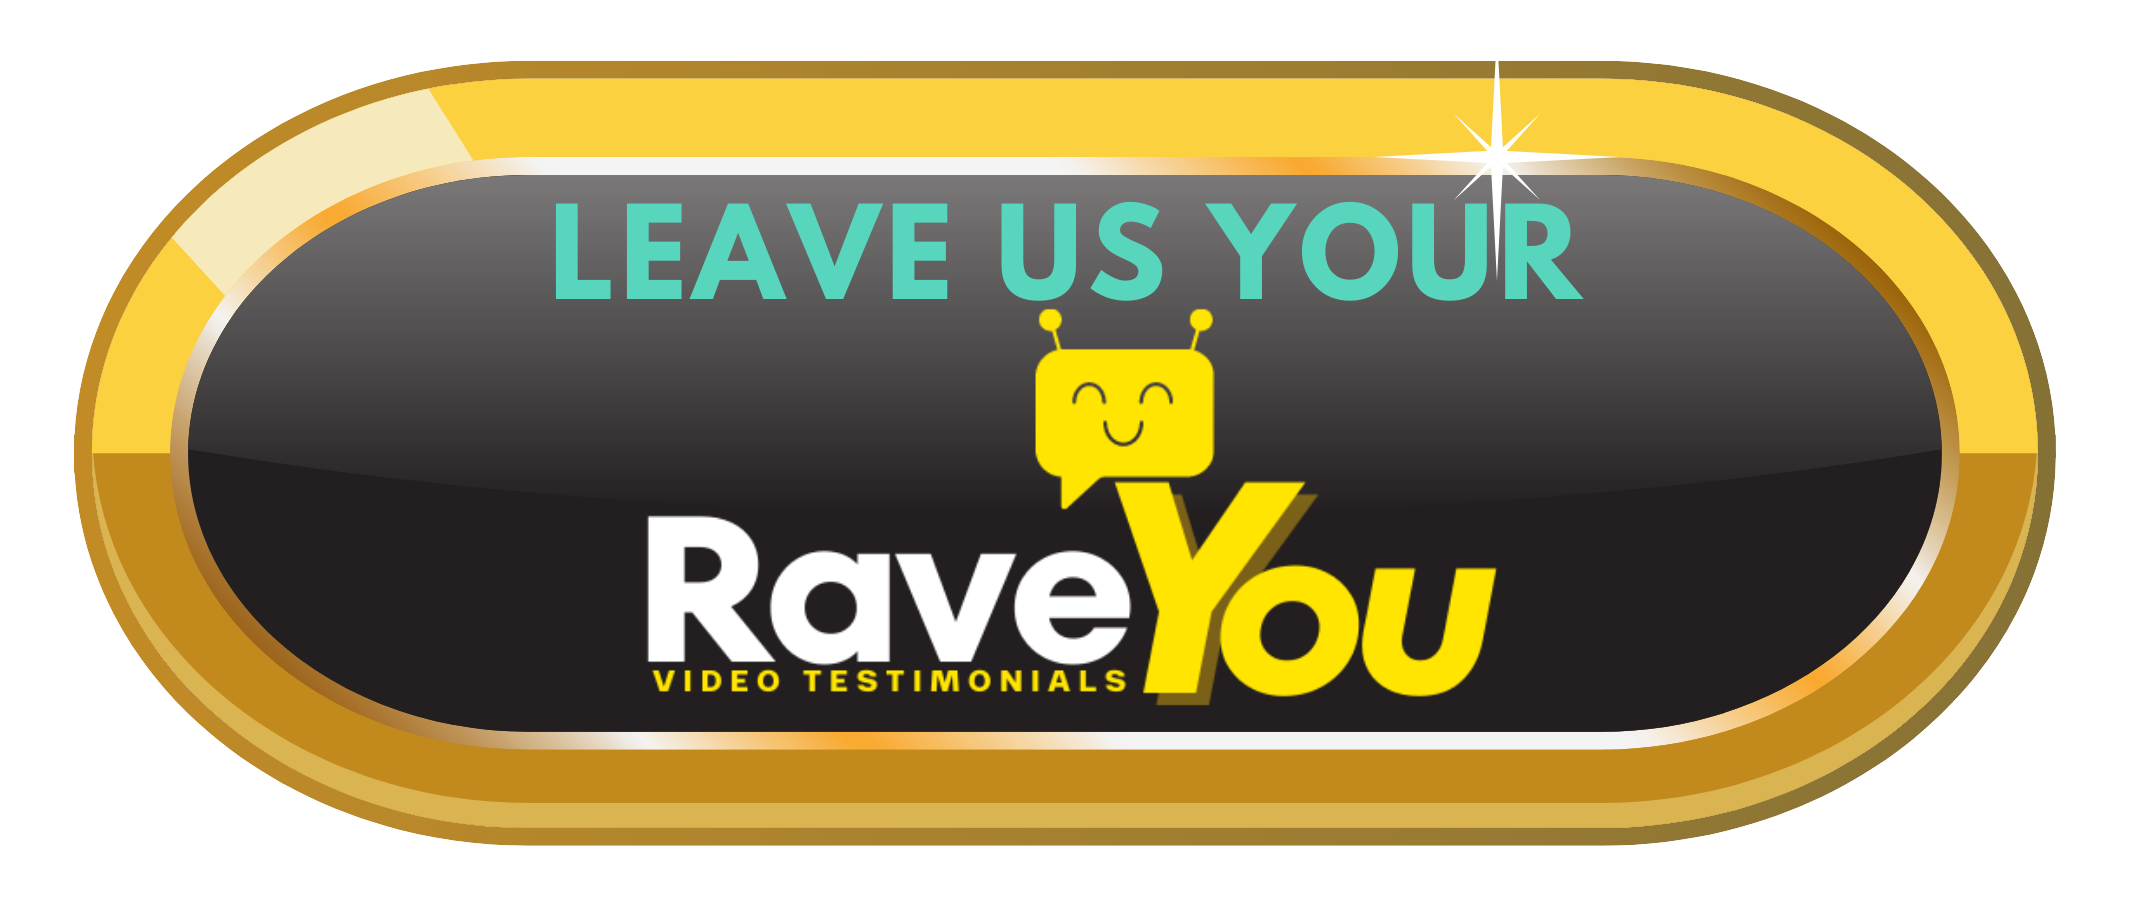 Leave us your RaveYou video testimonial